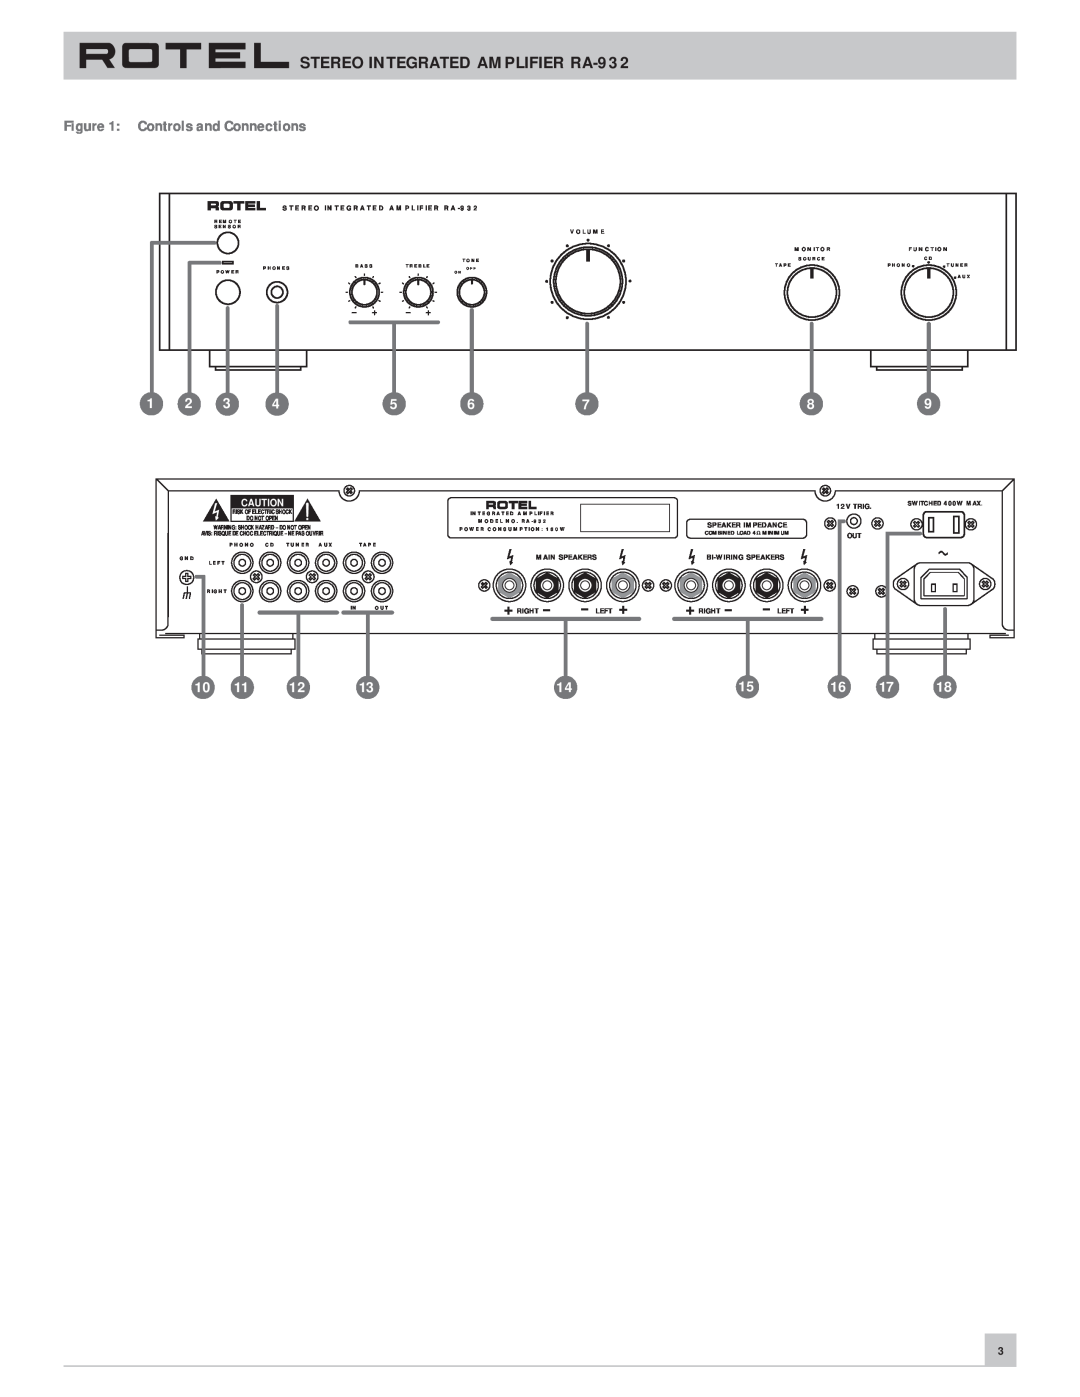 Rotel owner manual STEREO INTEGRATED AMPLIFIER RA-932, Controls and Connections 